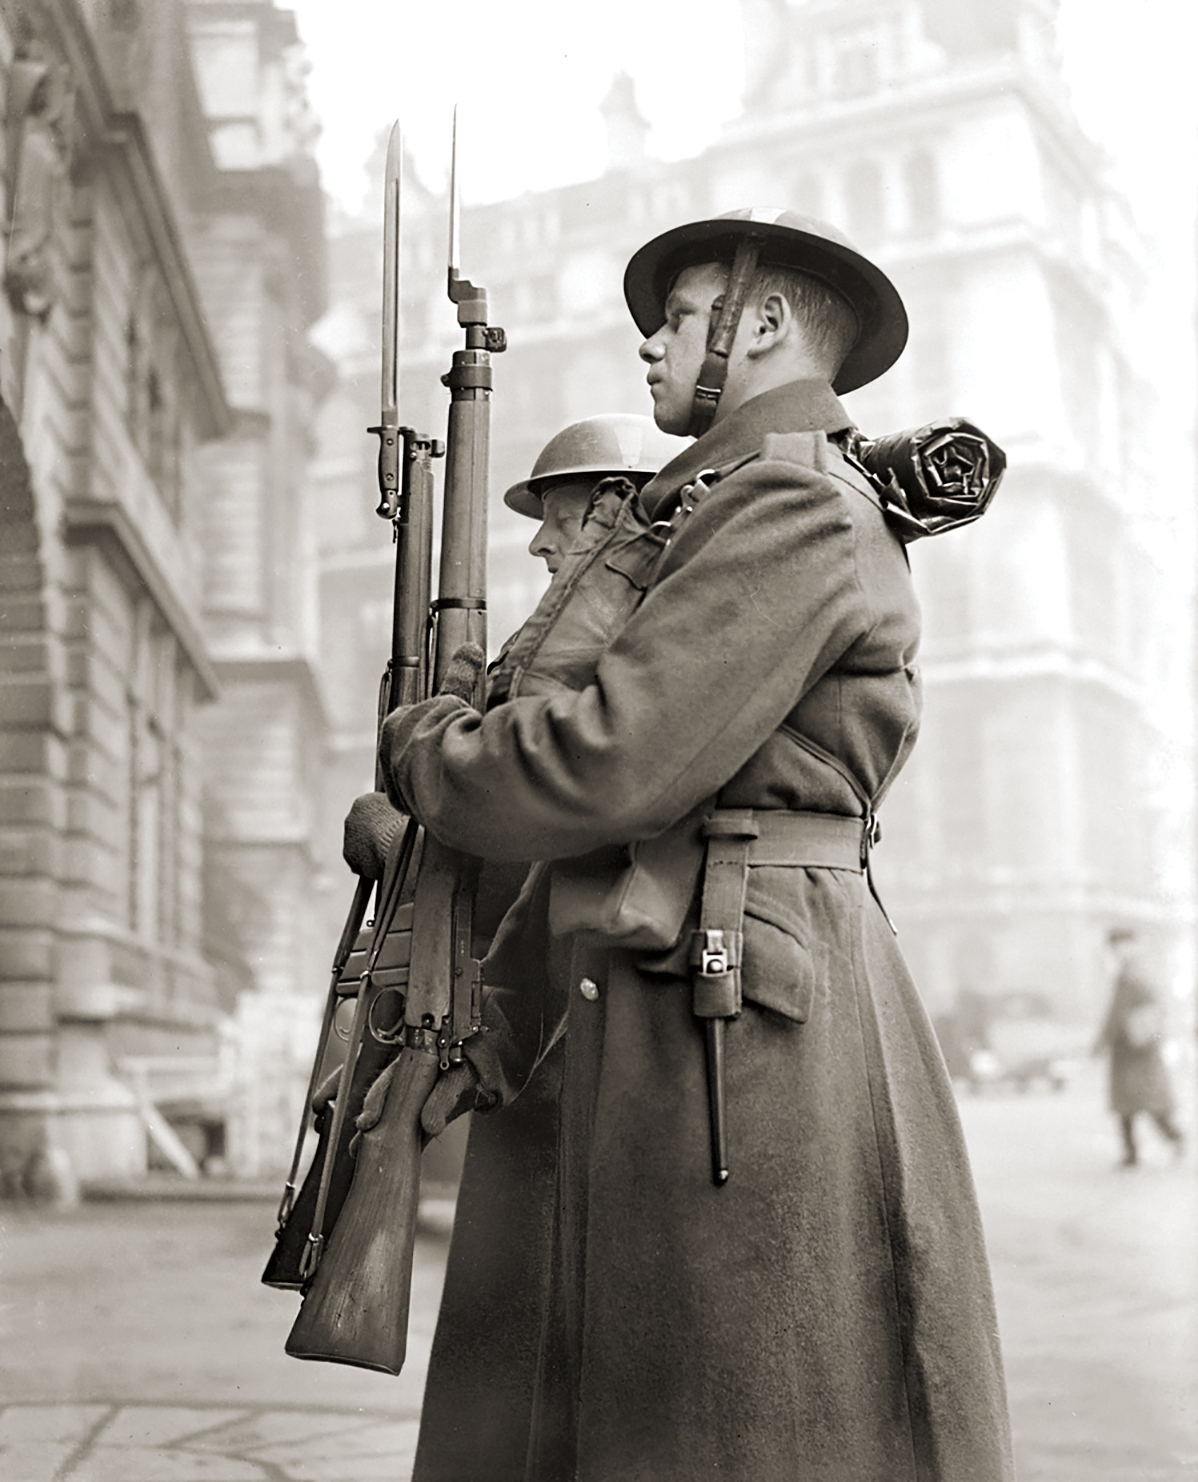 The Lee-Enfield Put a SMLE on Tommies' Faces and Fear in the